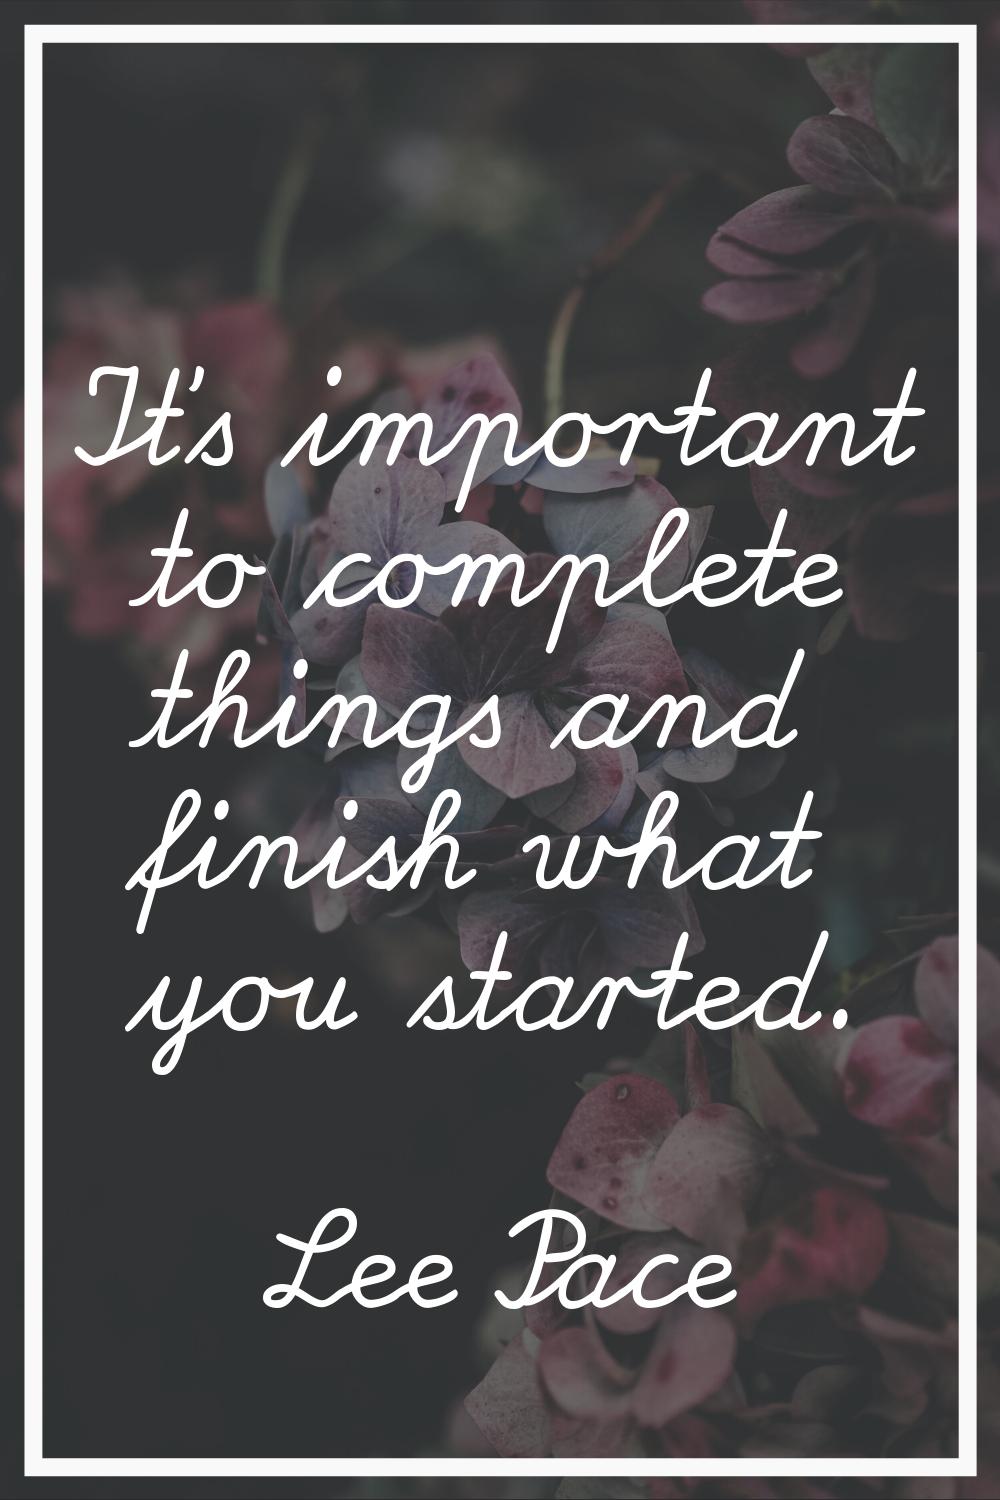 It's important to complete things and finish what you started.